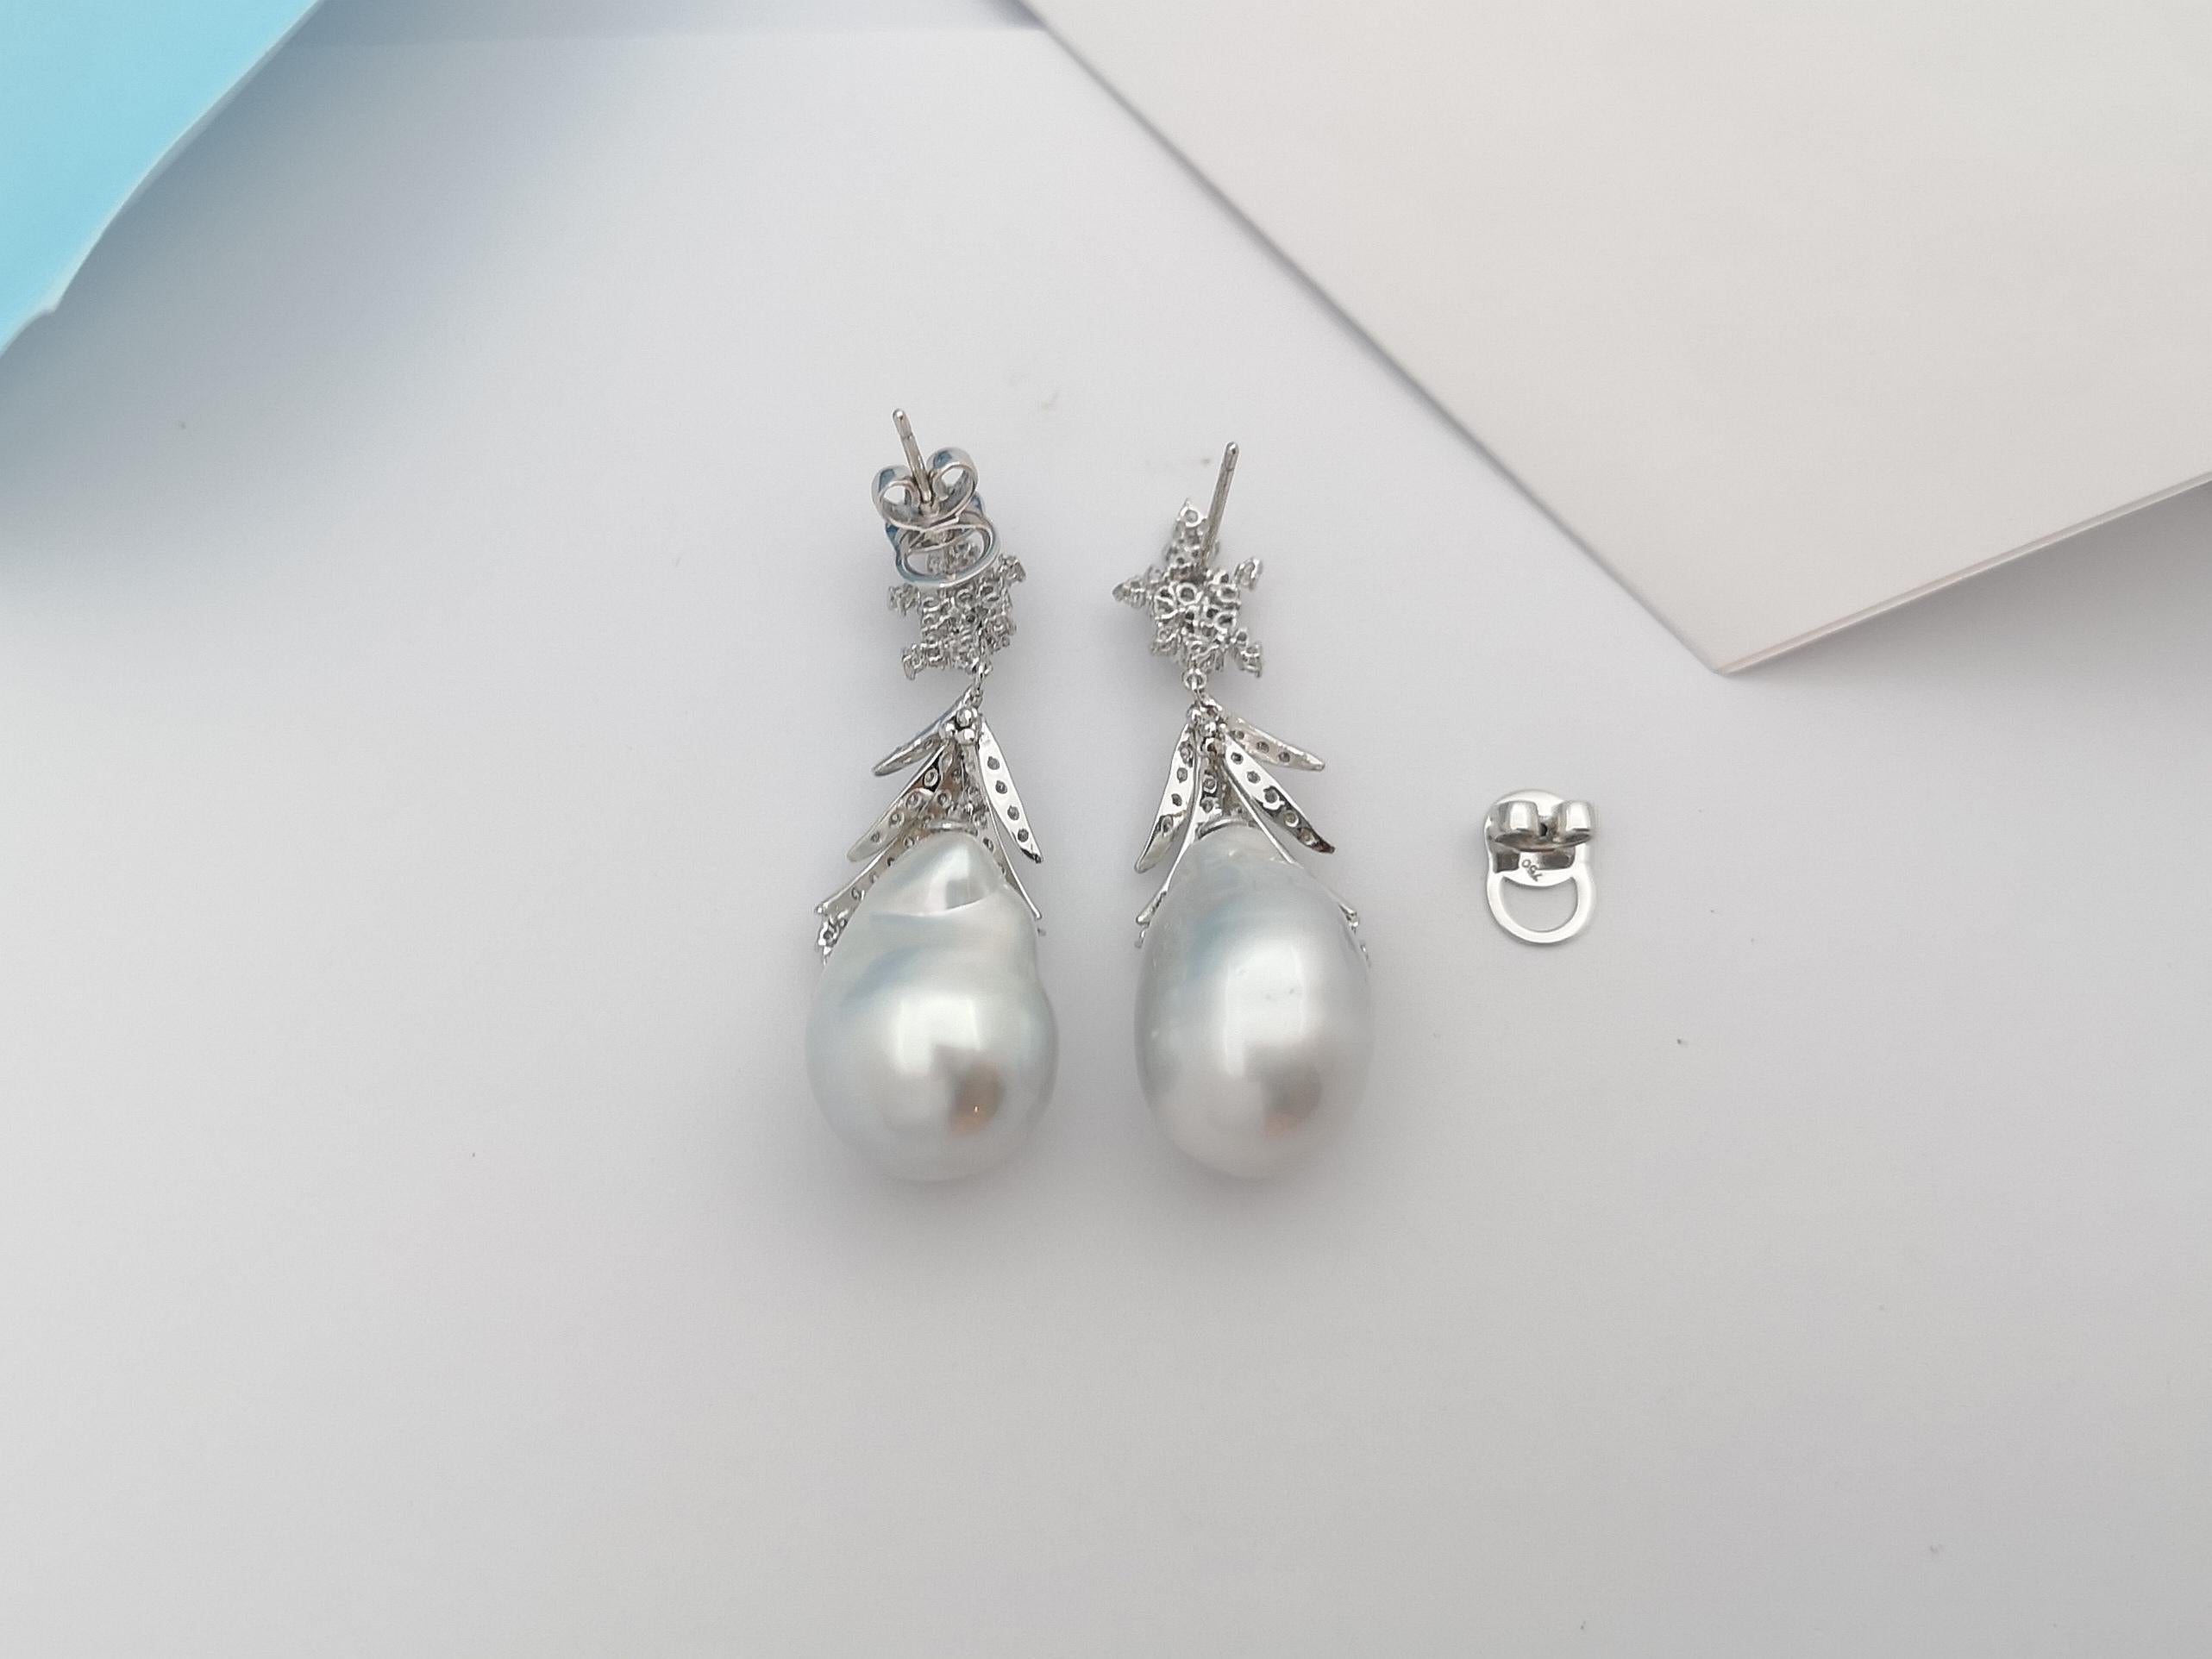 Brilliant Cut South Sea Pearl with Diamond Earrings Set in 18 Karat White Gold Set For Sale